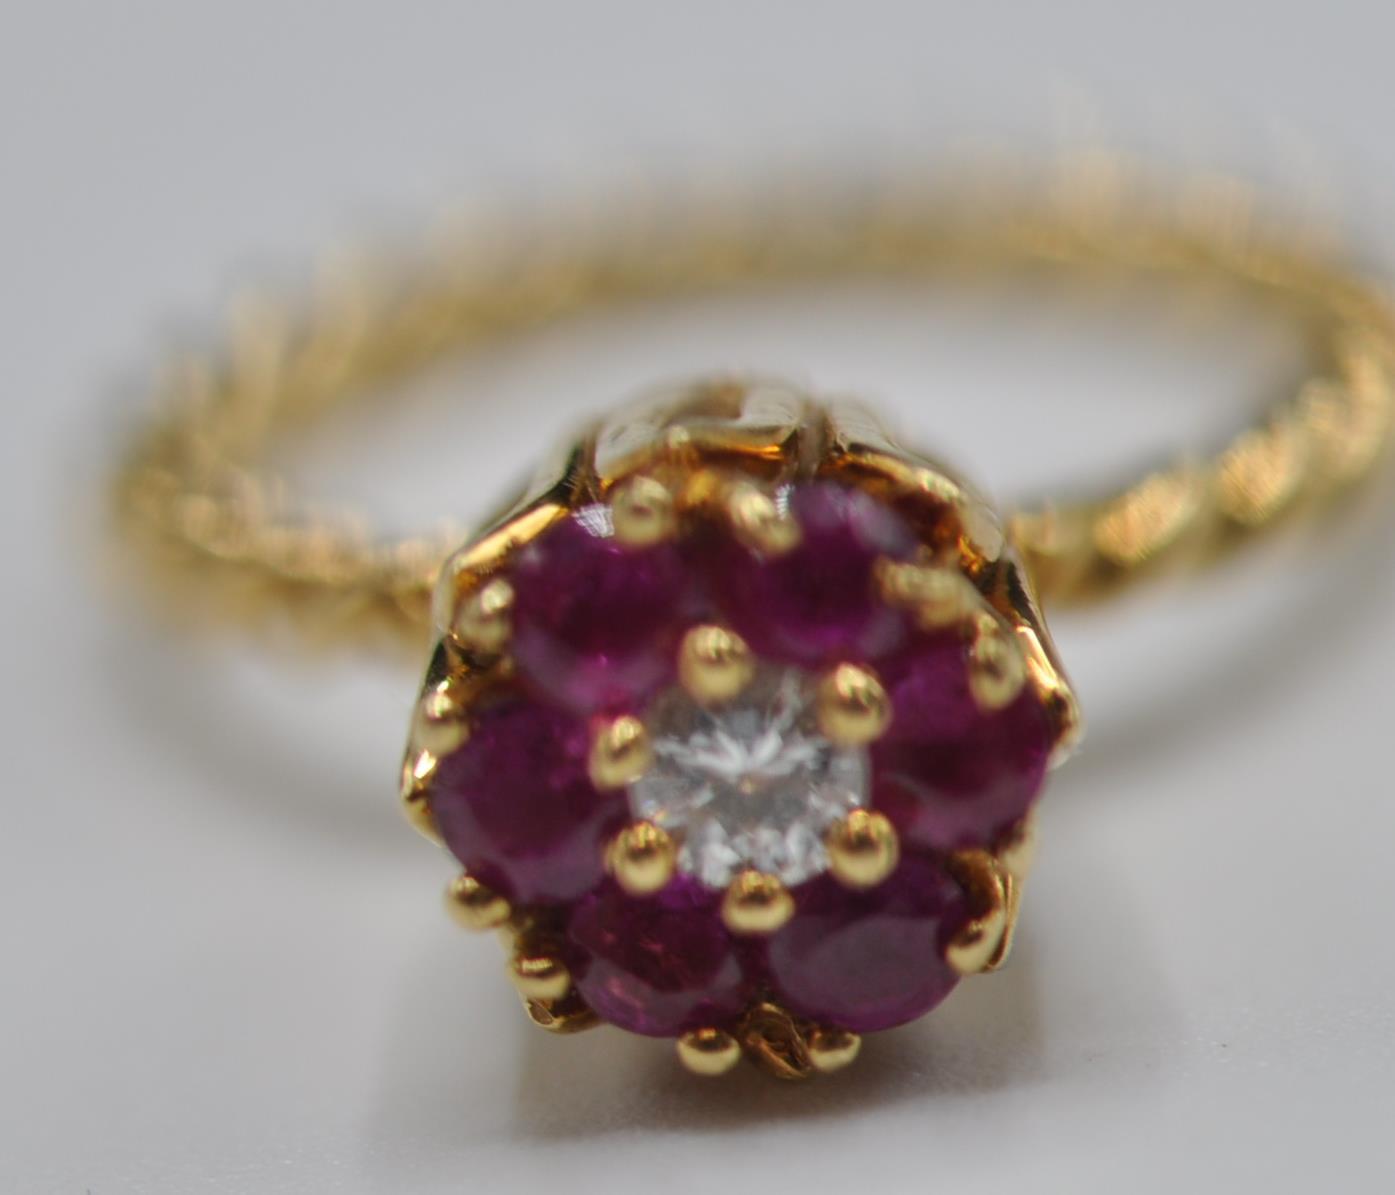 STAMPED 14CT GOLD RING WITH DIAMONDS AND RUBIES - Image 2 of 6